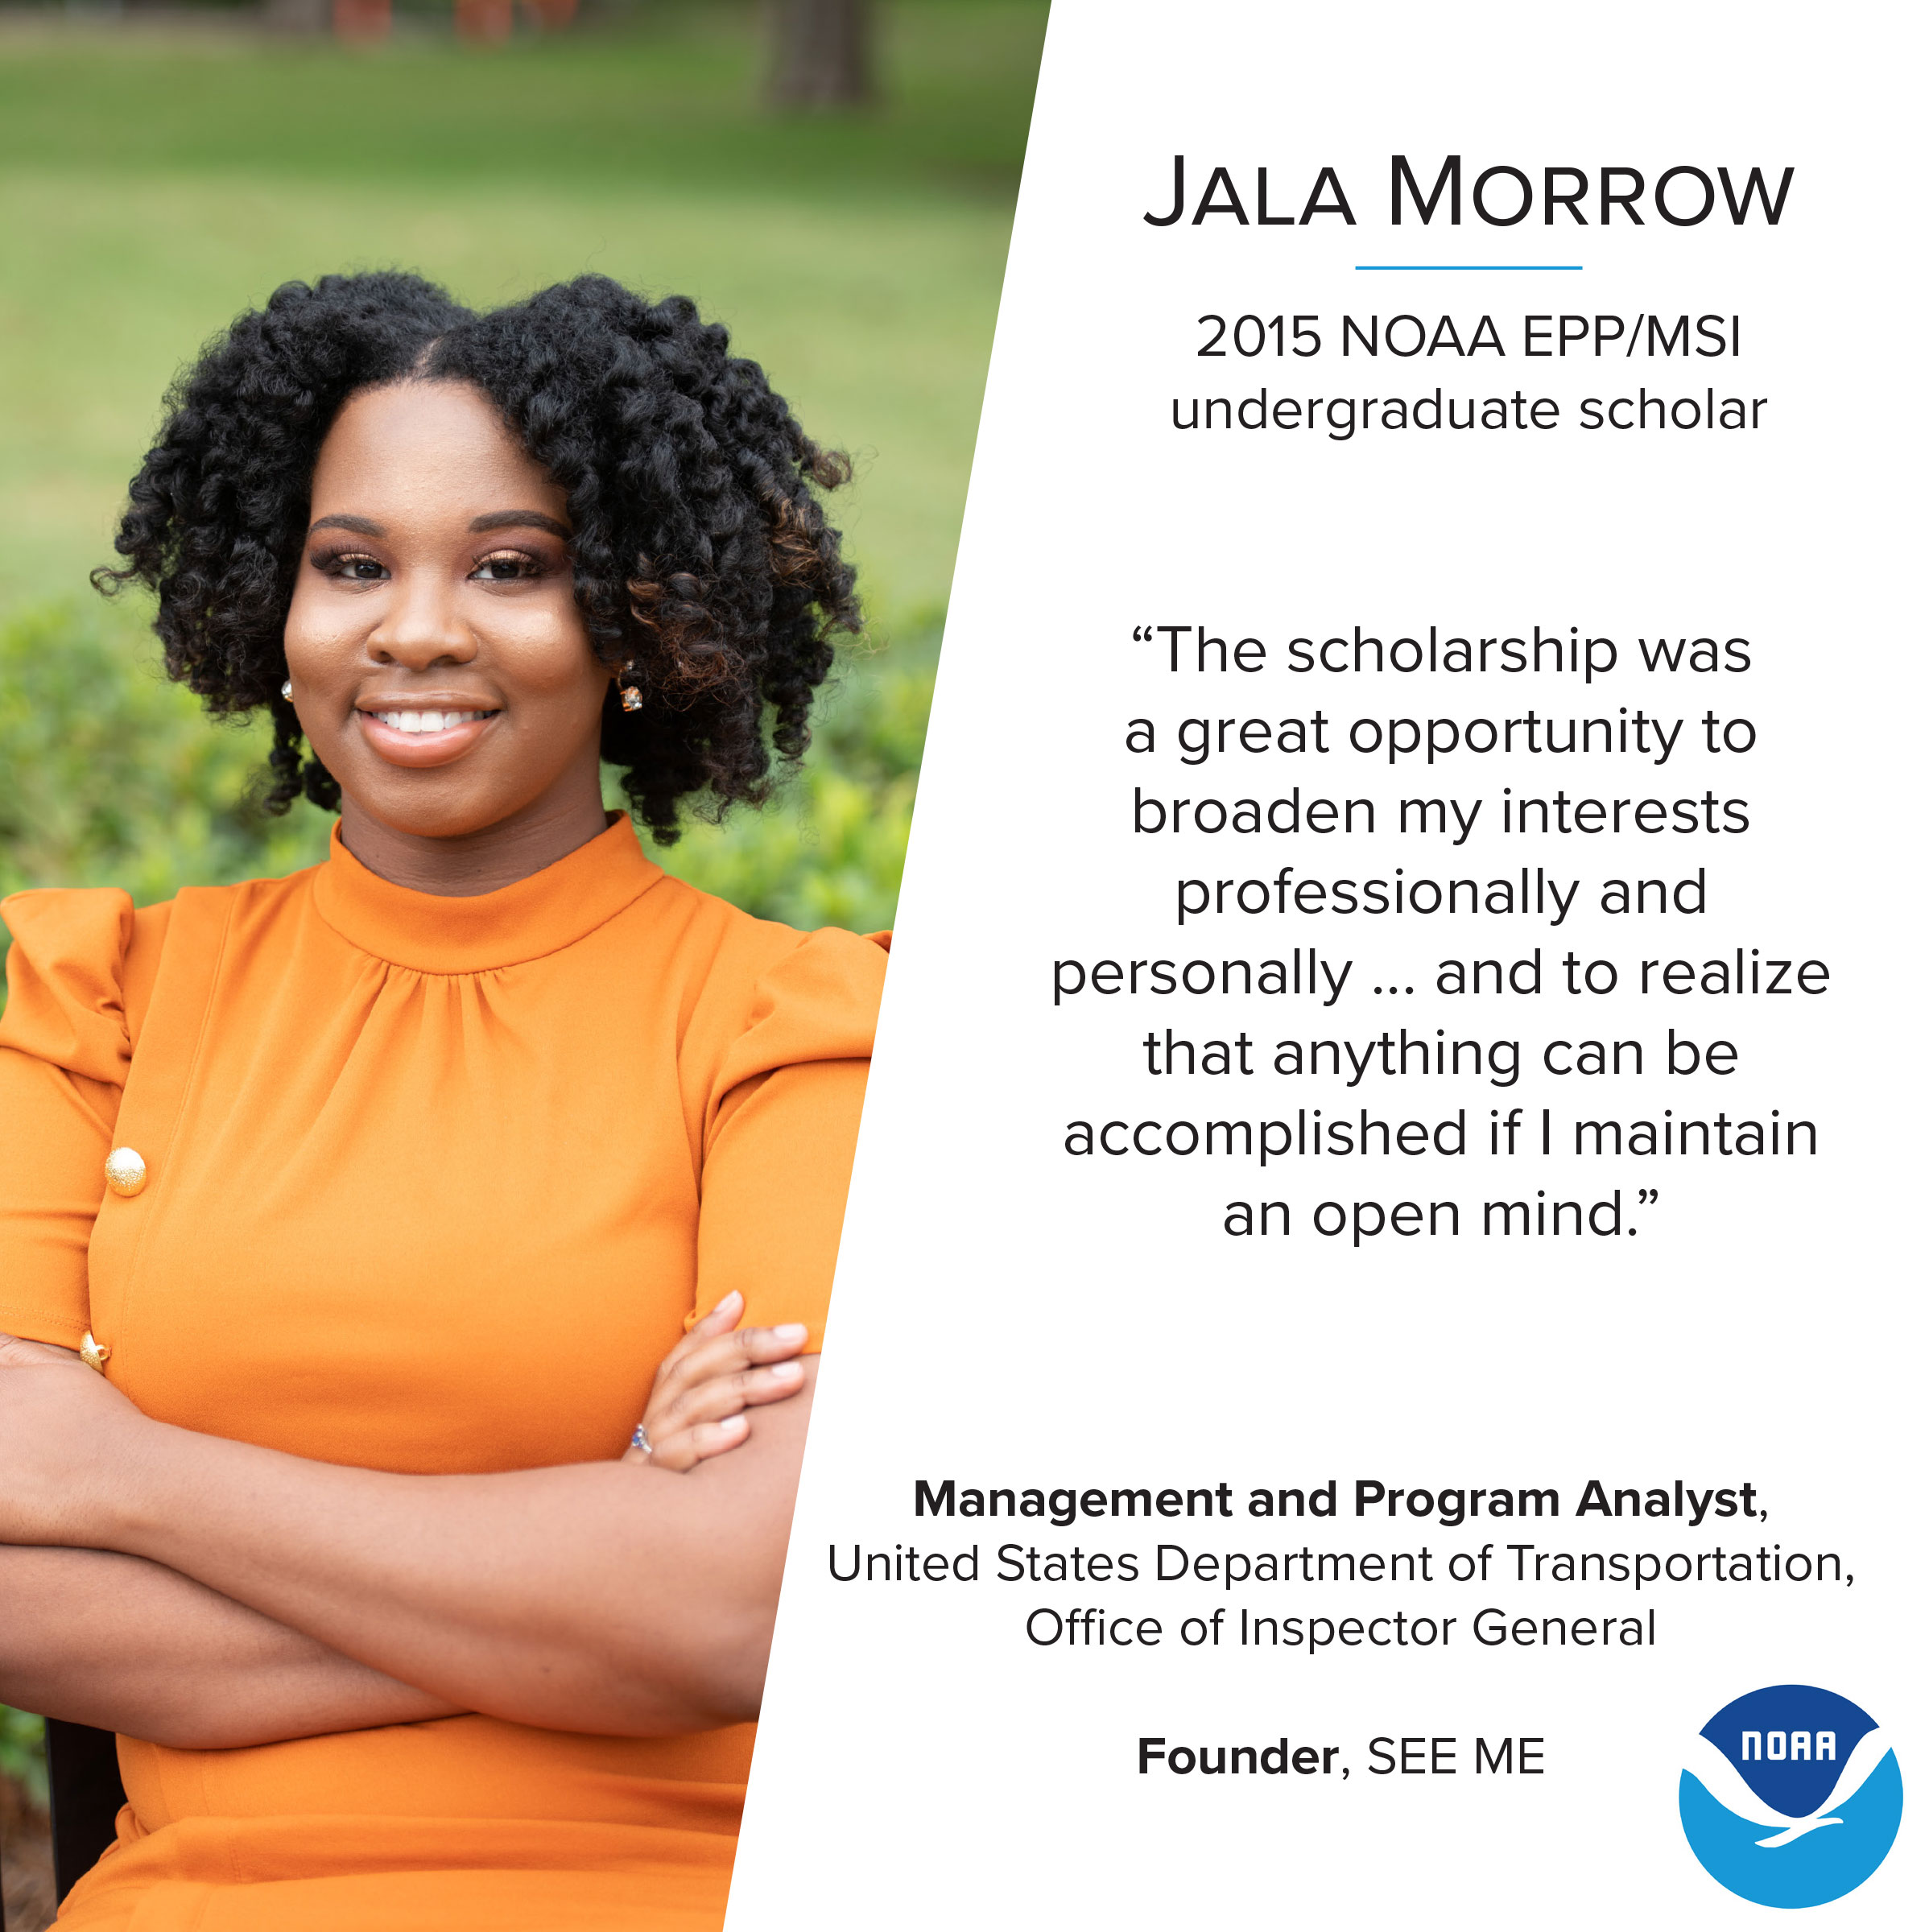 2015 NOAA EPP/MSI alumna Jala Morrow in 2019 after completing her Master's of Business Administration degree. Her photo is alongside her quote "The scholarship was a great opportunity to broaden my interests professionally and personally... and to realize that anything can be accomplished if I maintain an open mind." Jala is currently a Management and Program Analyst for the United States Department of Transportation, Office of Inspector General and the Founder of SEE-ME.